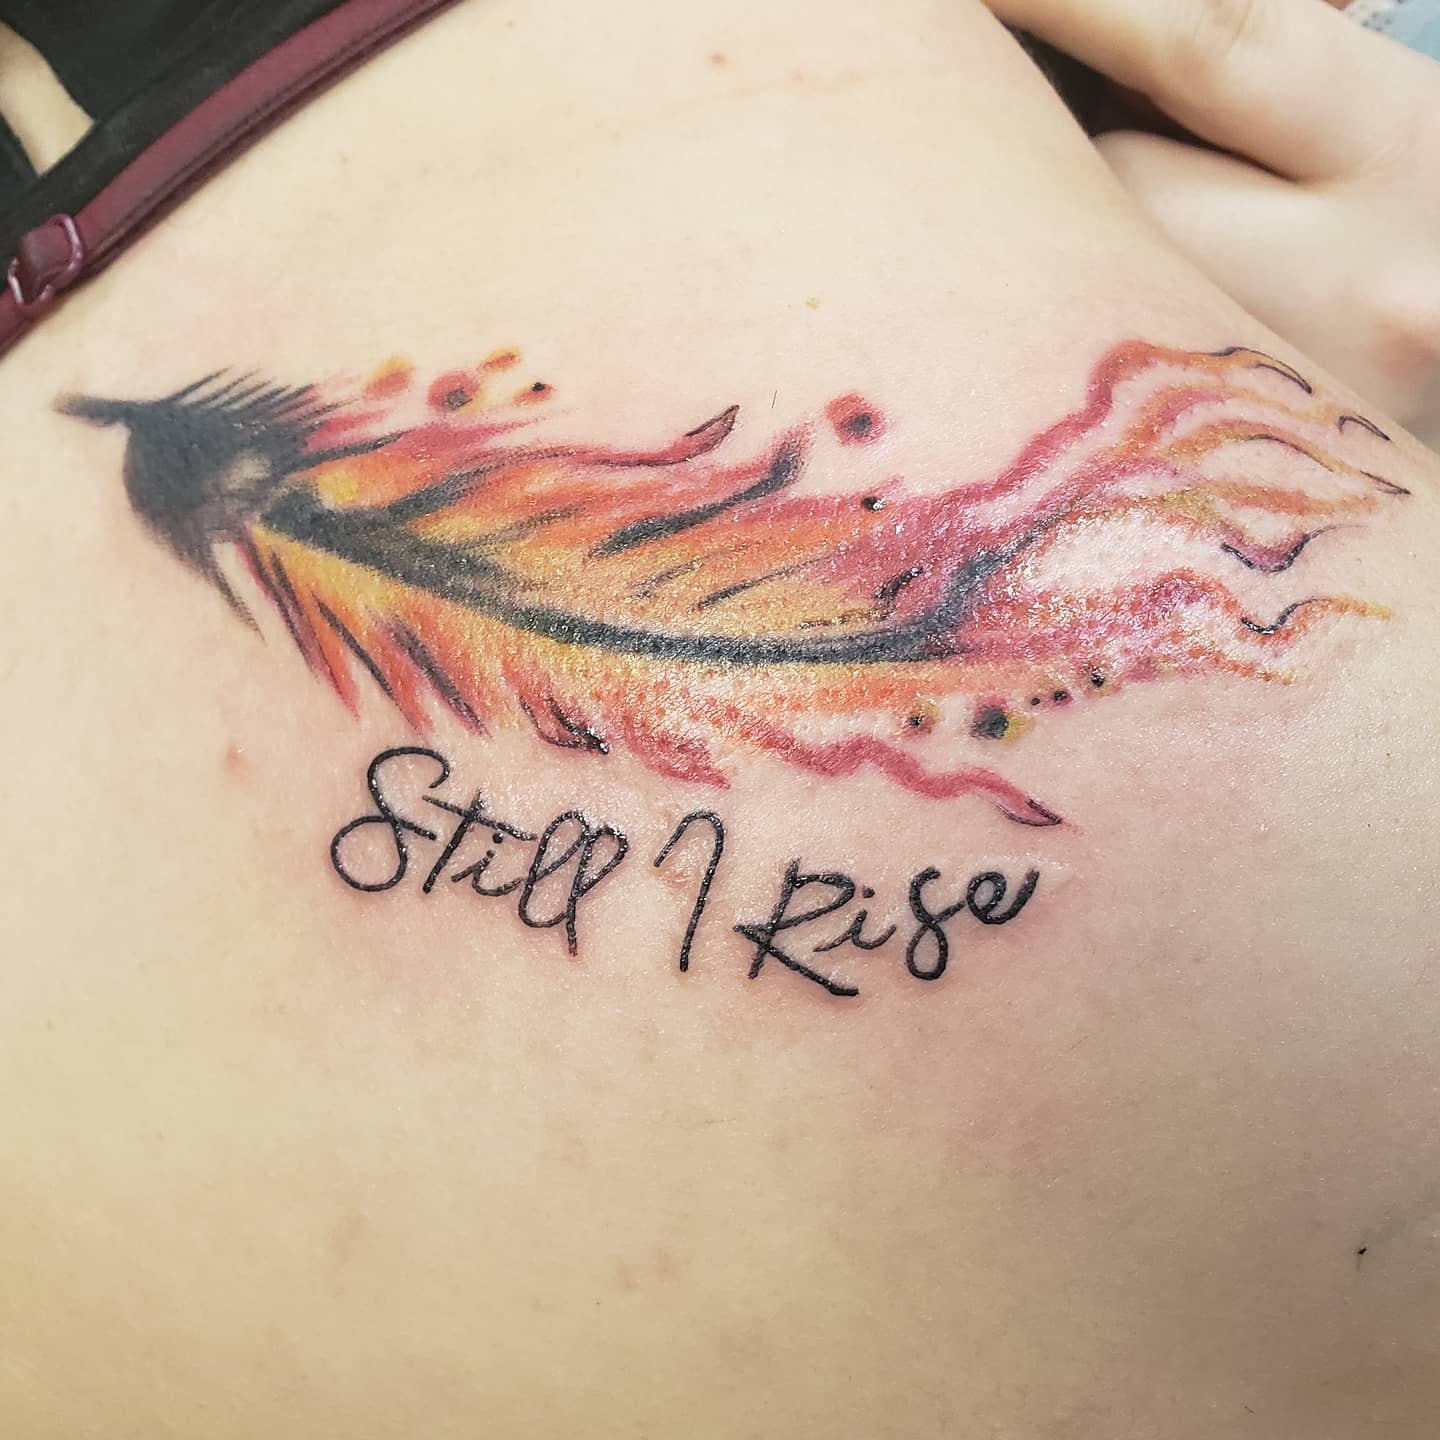 The sun will rise lettering tattoo